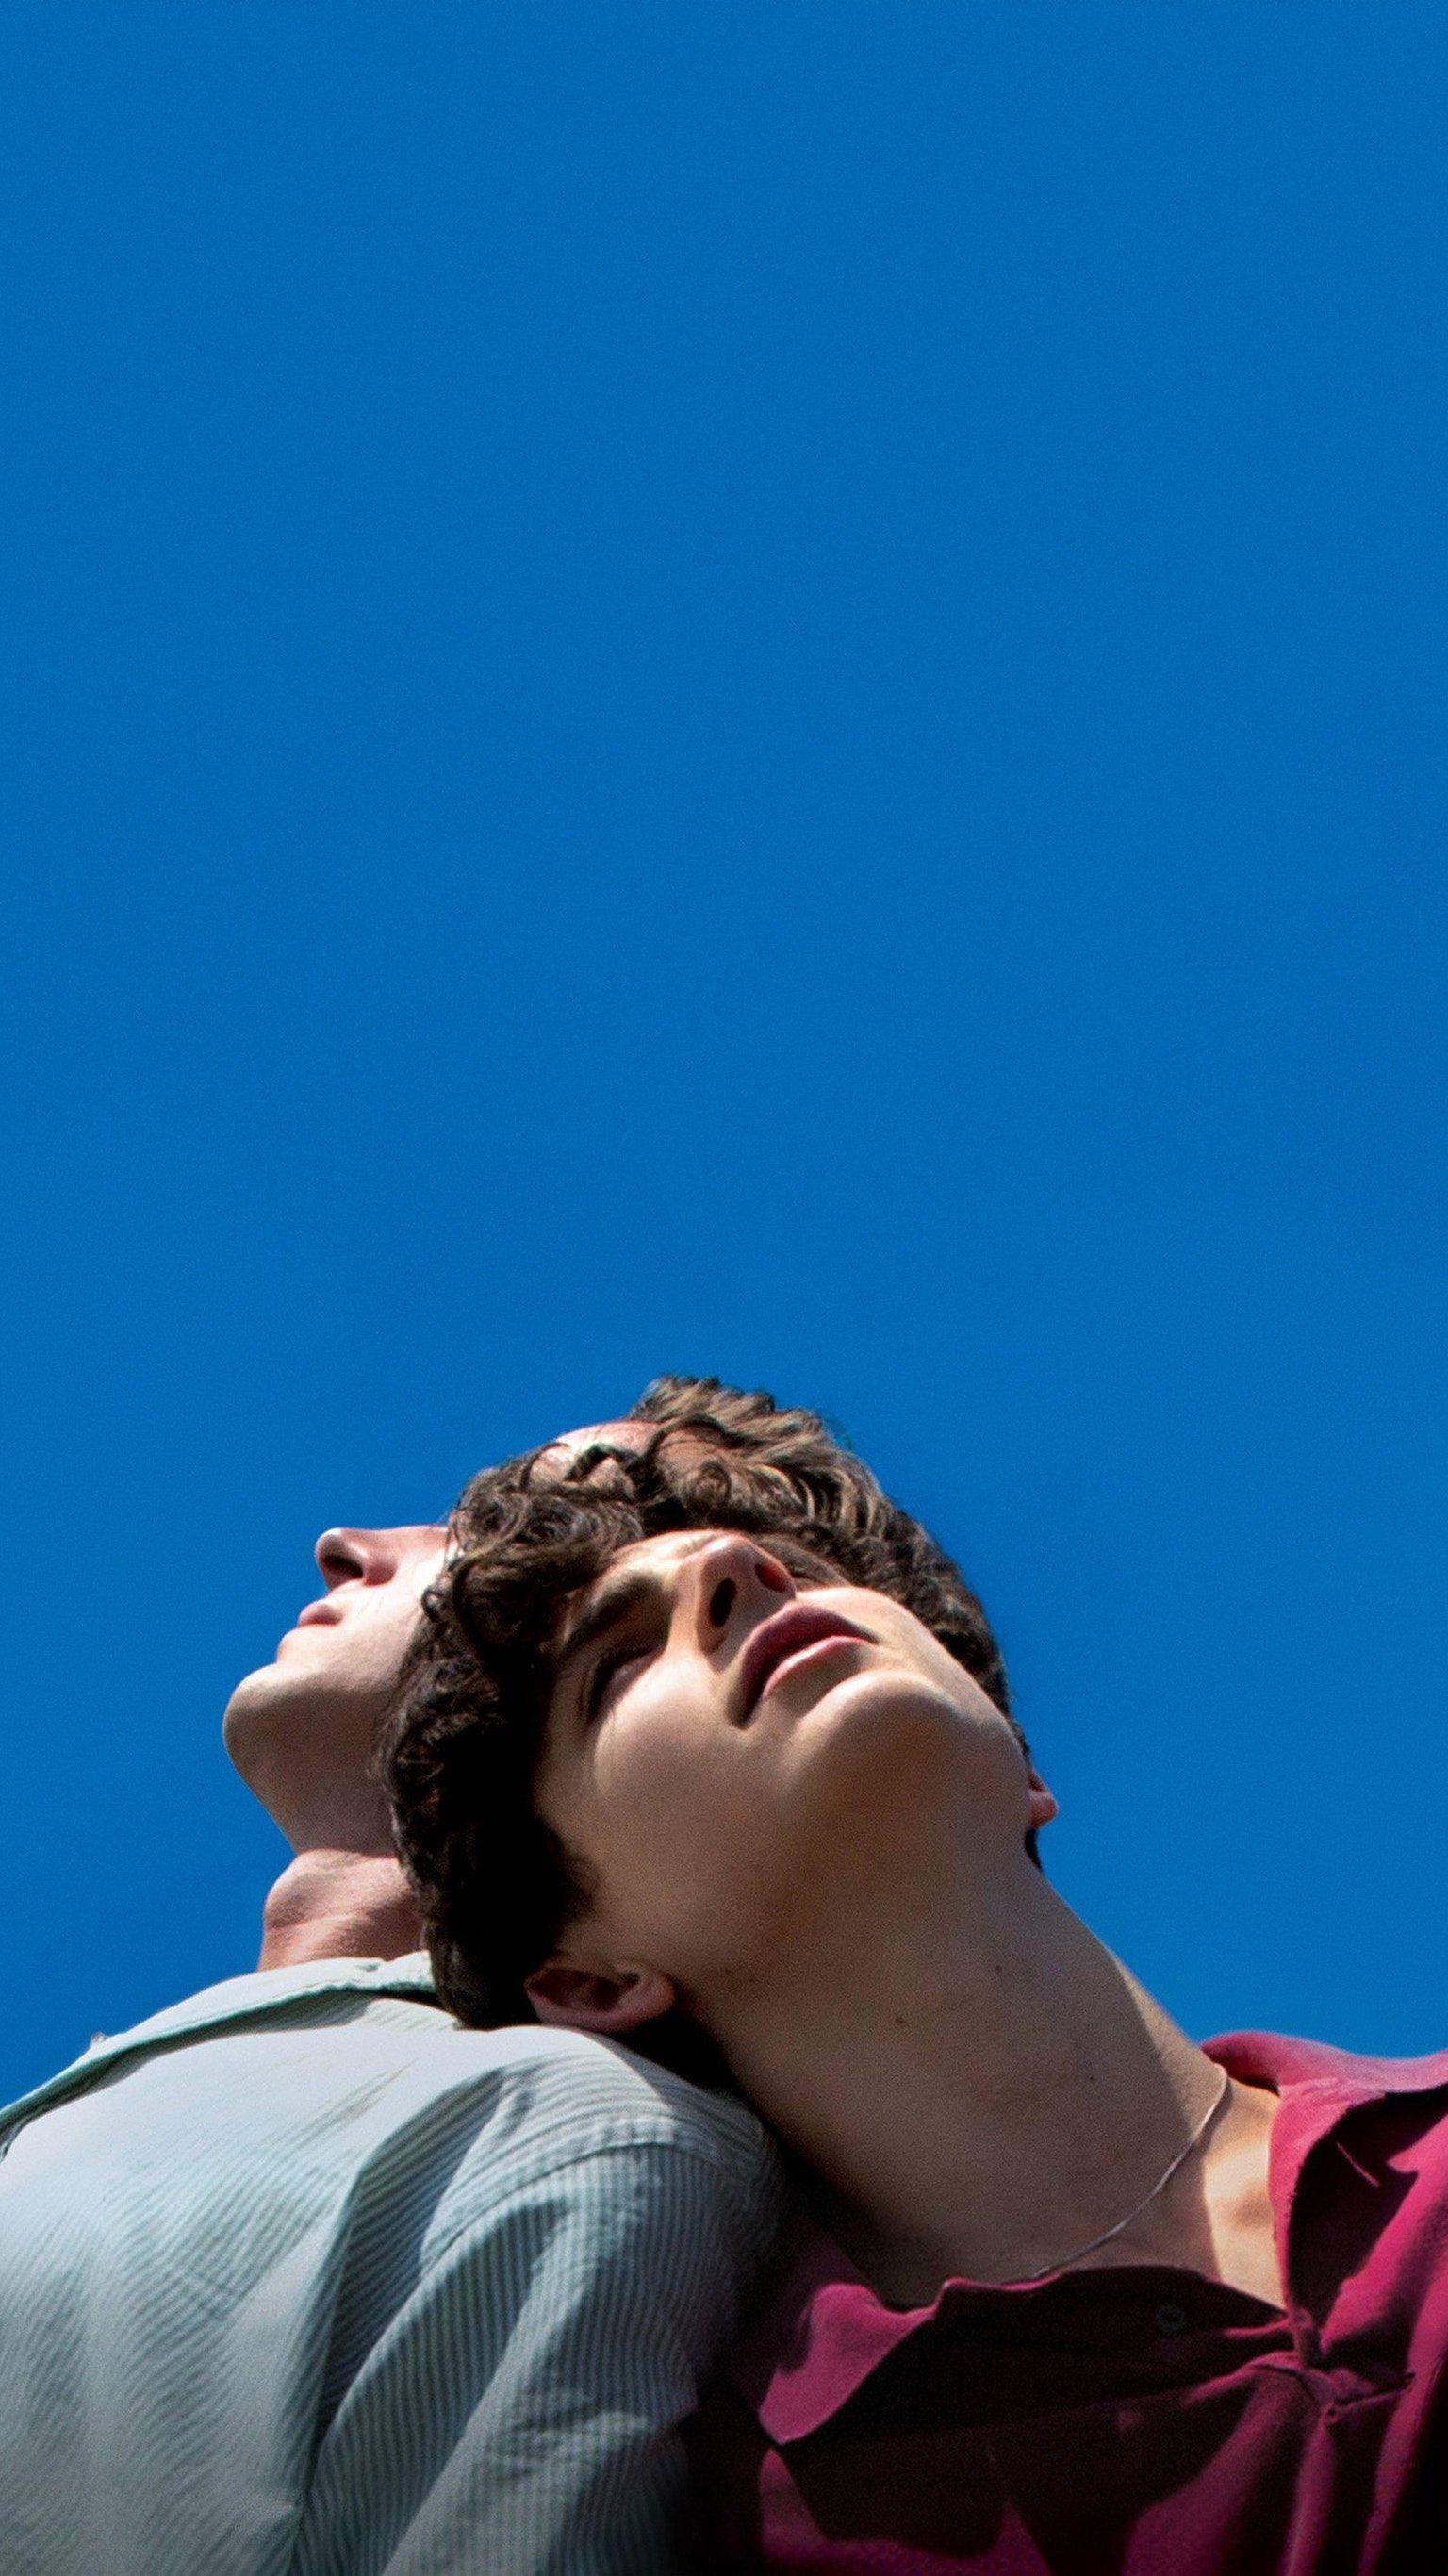 Call Me by Your Name (2017) Phone Wallpaper. Moviemania. Name wallpaper, Your name wallpaper, Timothee chalamet